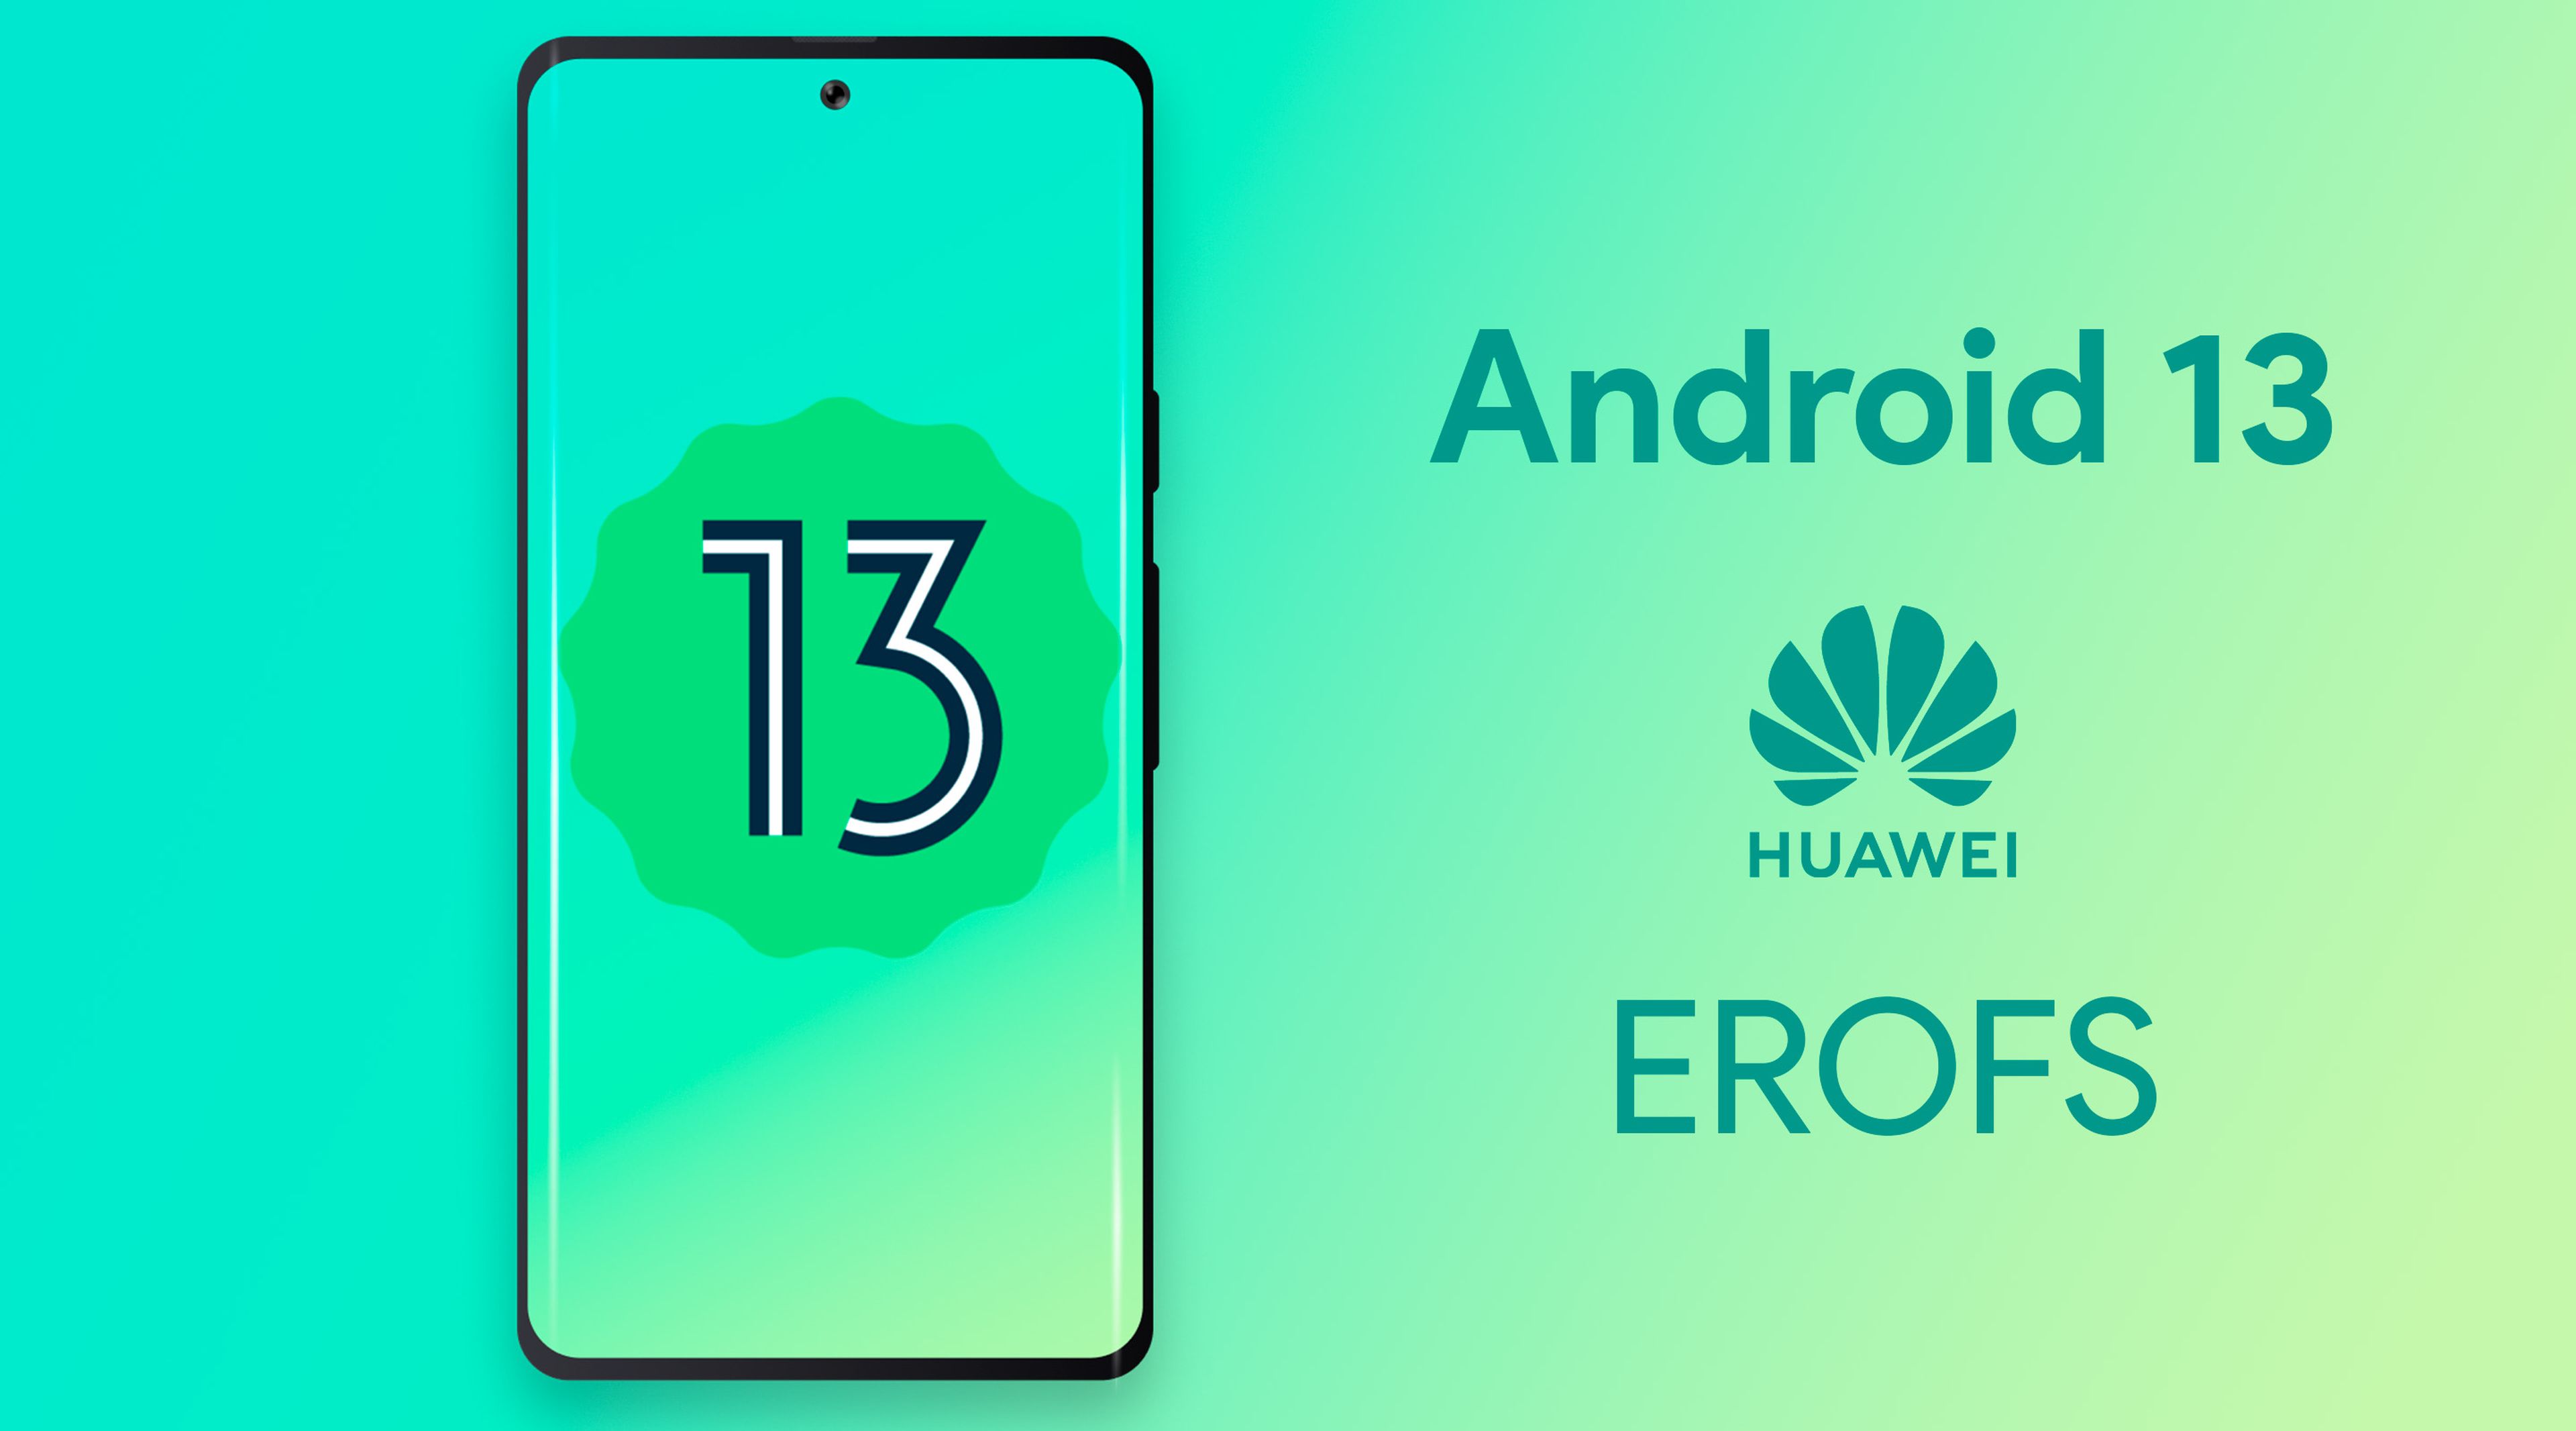 Android 13 HUAWEI EROFS